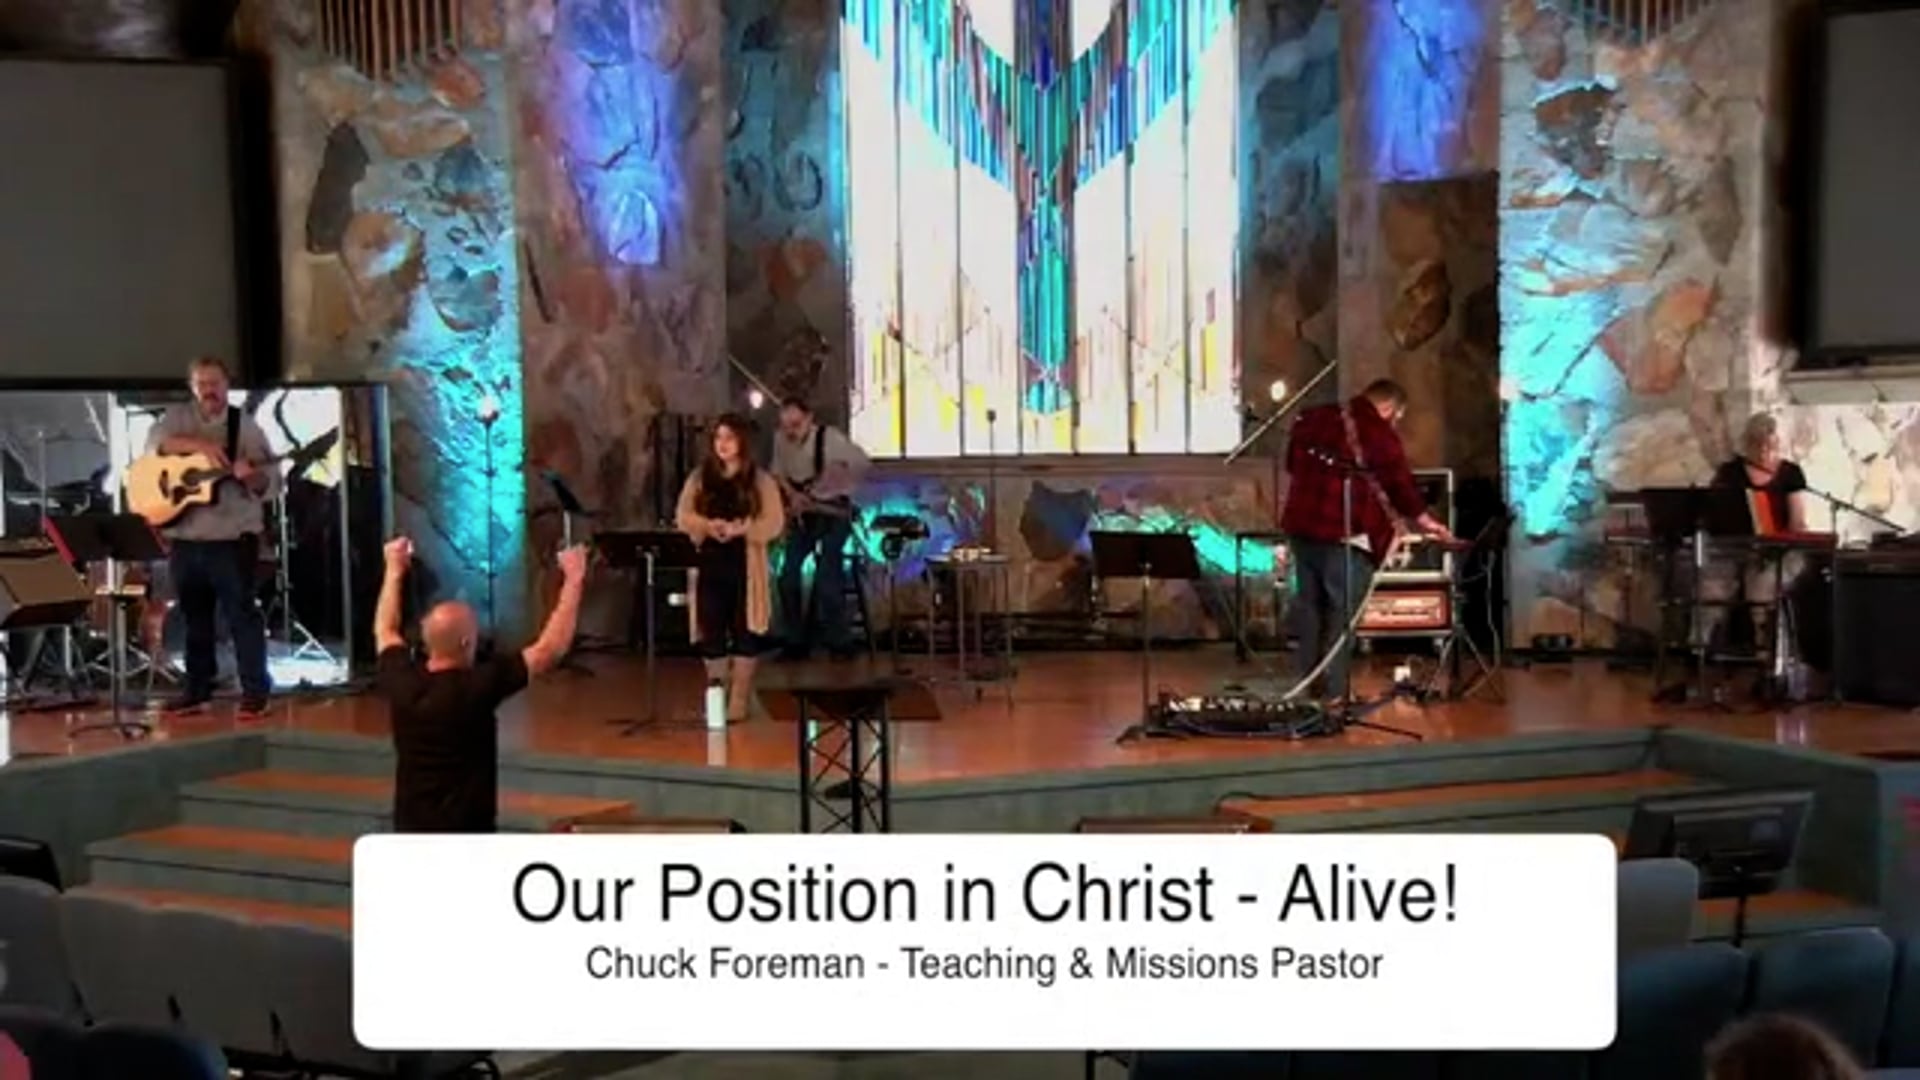 Our Position in Christ - Alive!